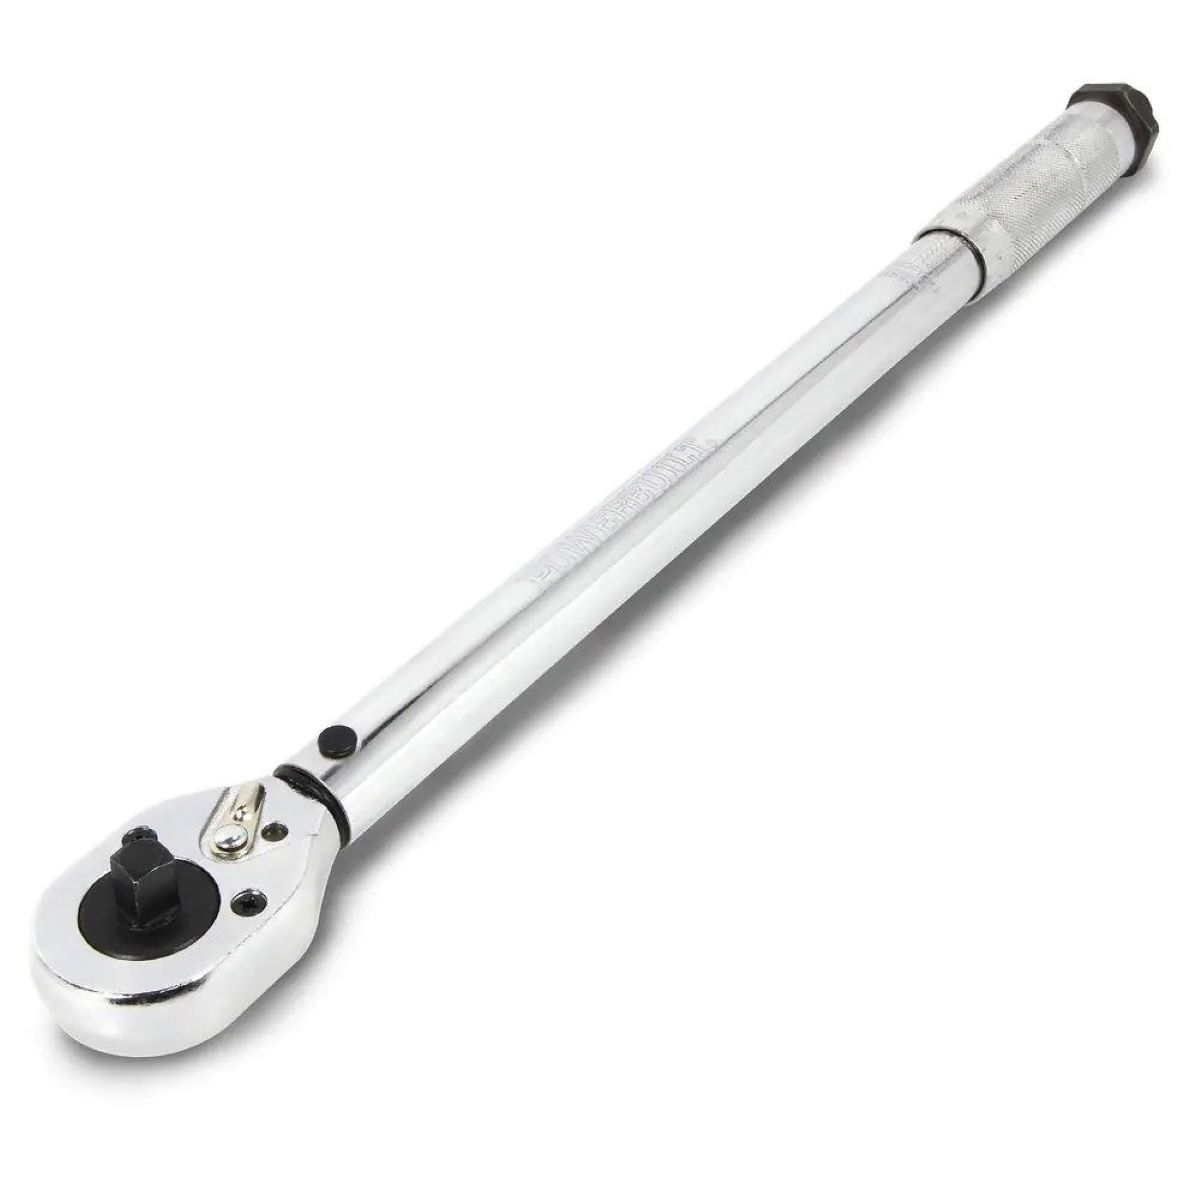 How To Store Torque Wrench